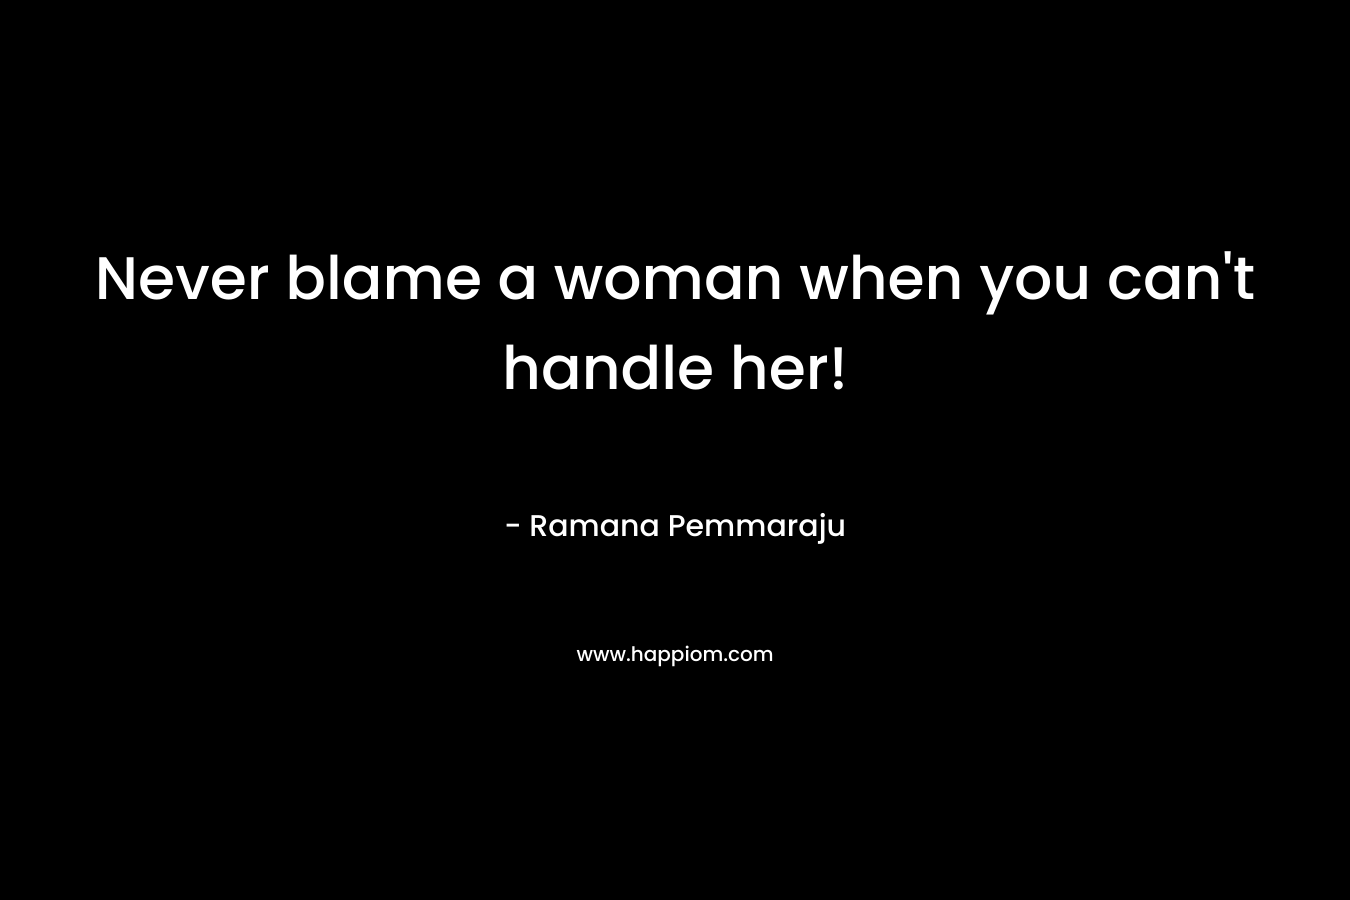 Never blame a woman when you can't handle her!